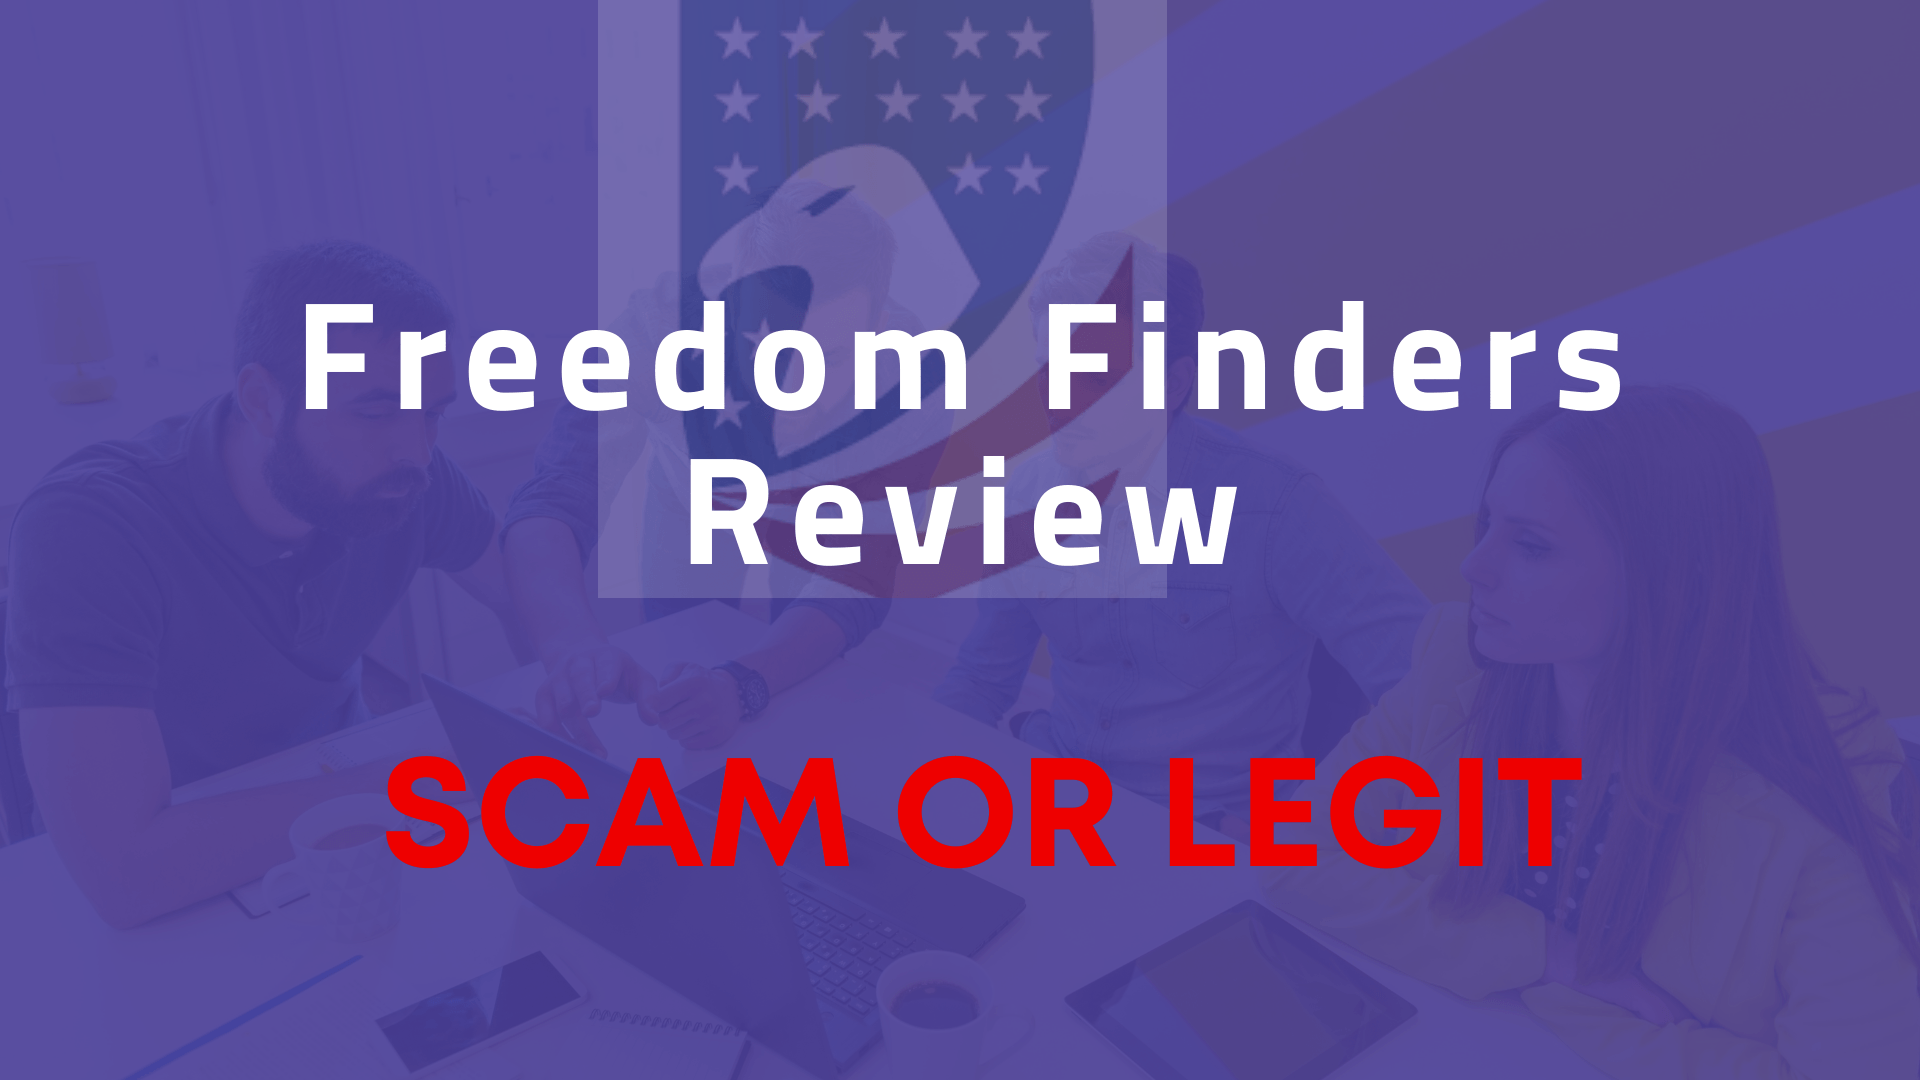 Freedom Finders Review